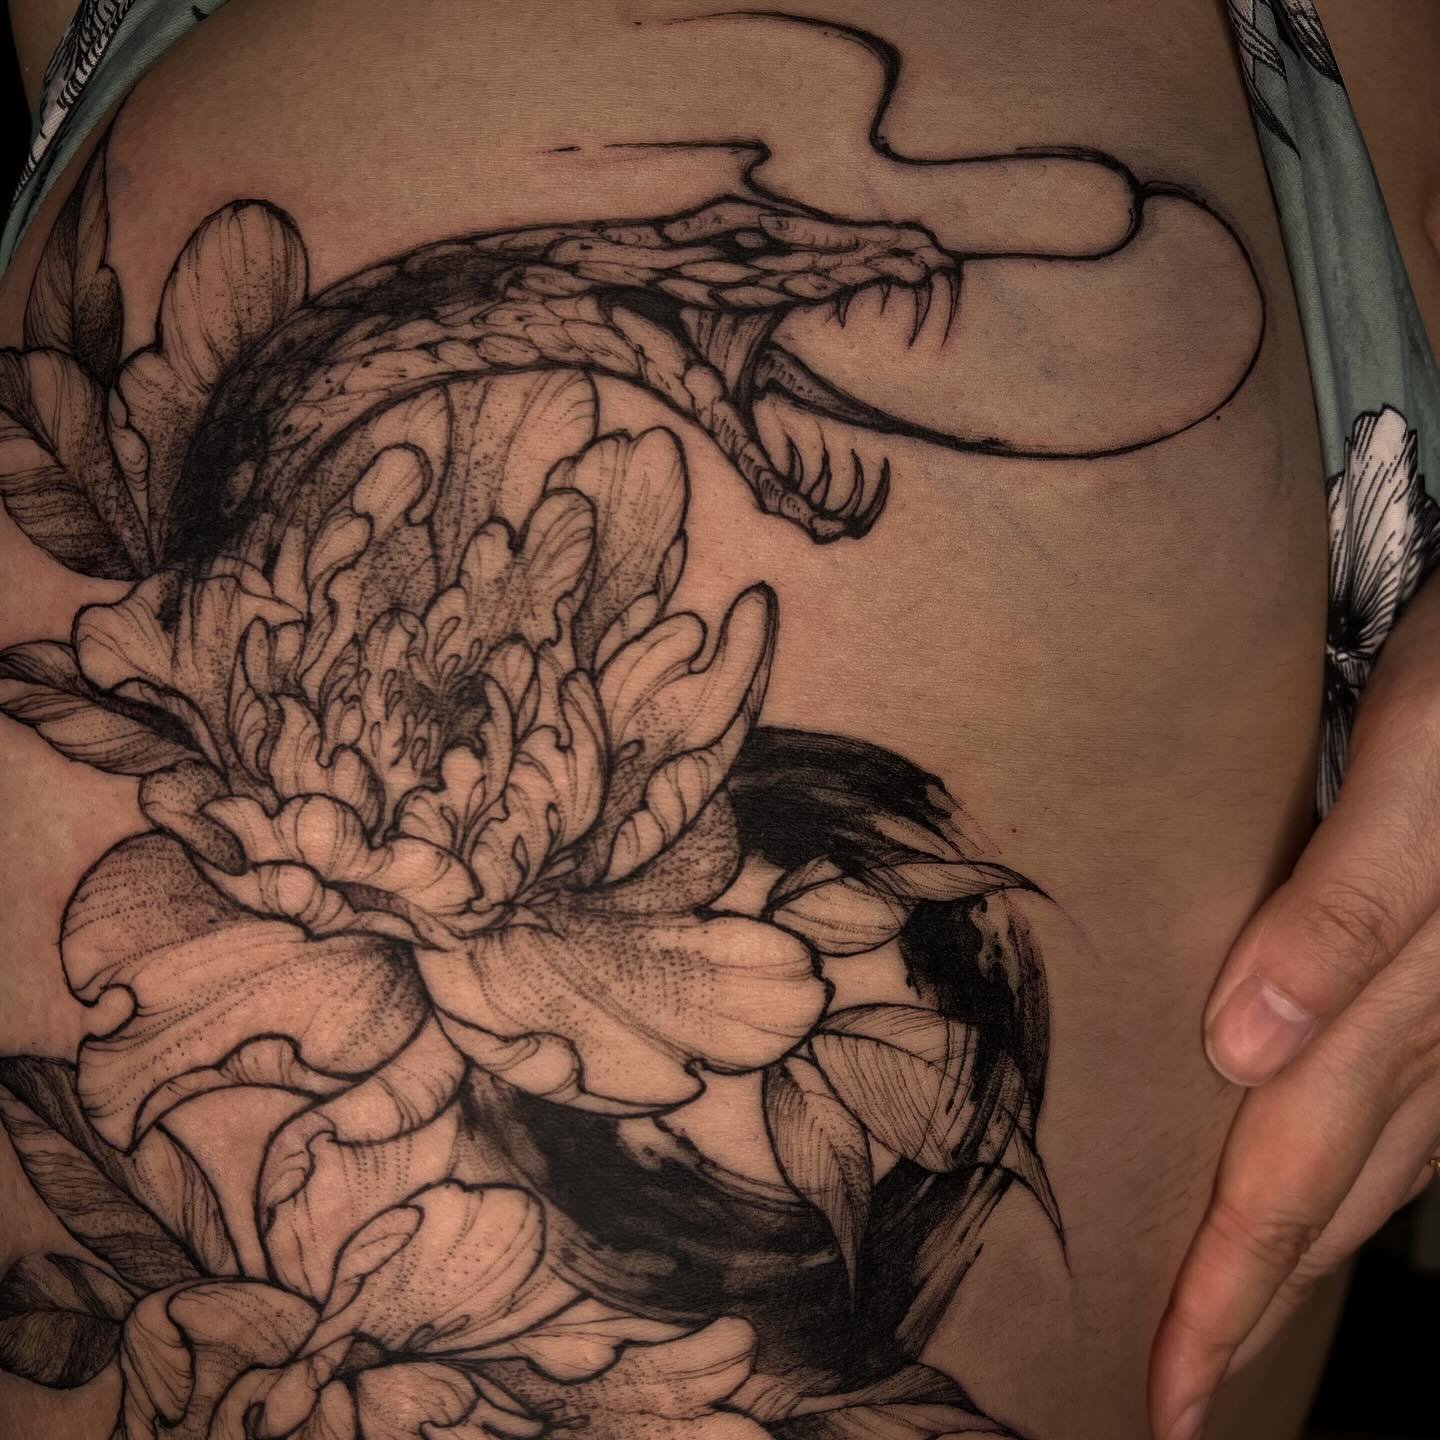 long time no snake peony 🫣 ty Jo for comin all the way from the UK 🌸🌸 squeezed this all in one session 🐍

#watercolortattoo #snaketattoo #peonytattoo #calligraphytattoo #brushtattoo #vancitytattoo #vancouvertattoo #vancouvertattooartist #asiansty